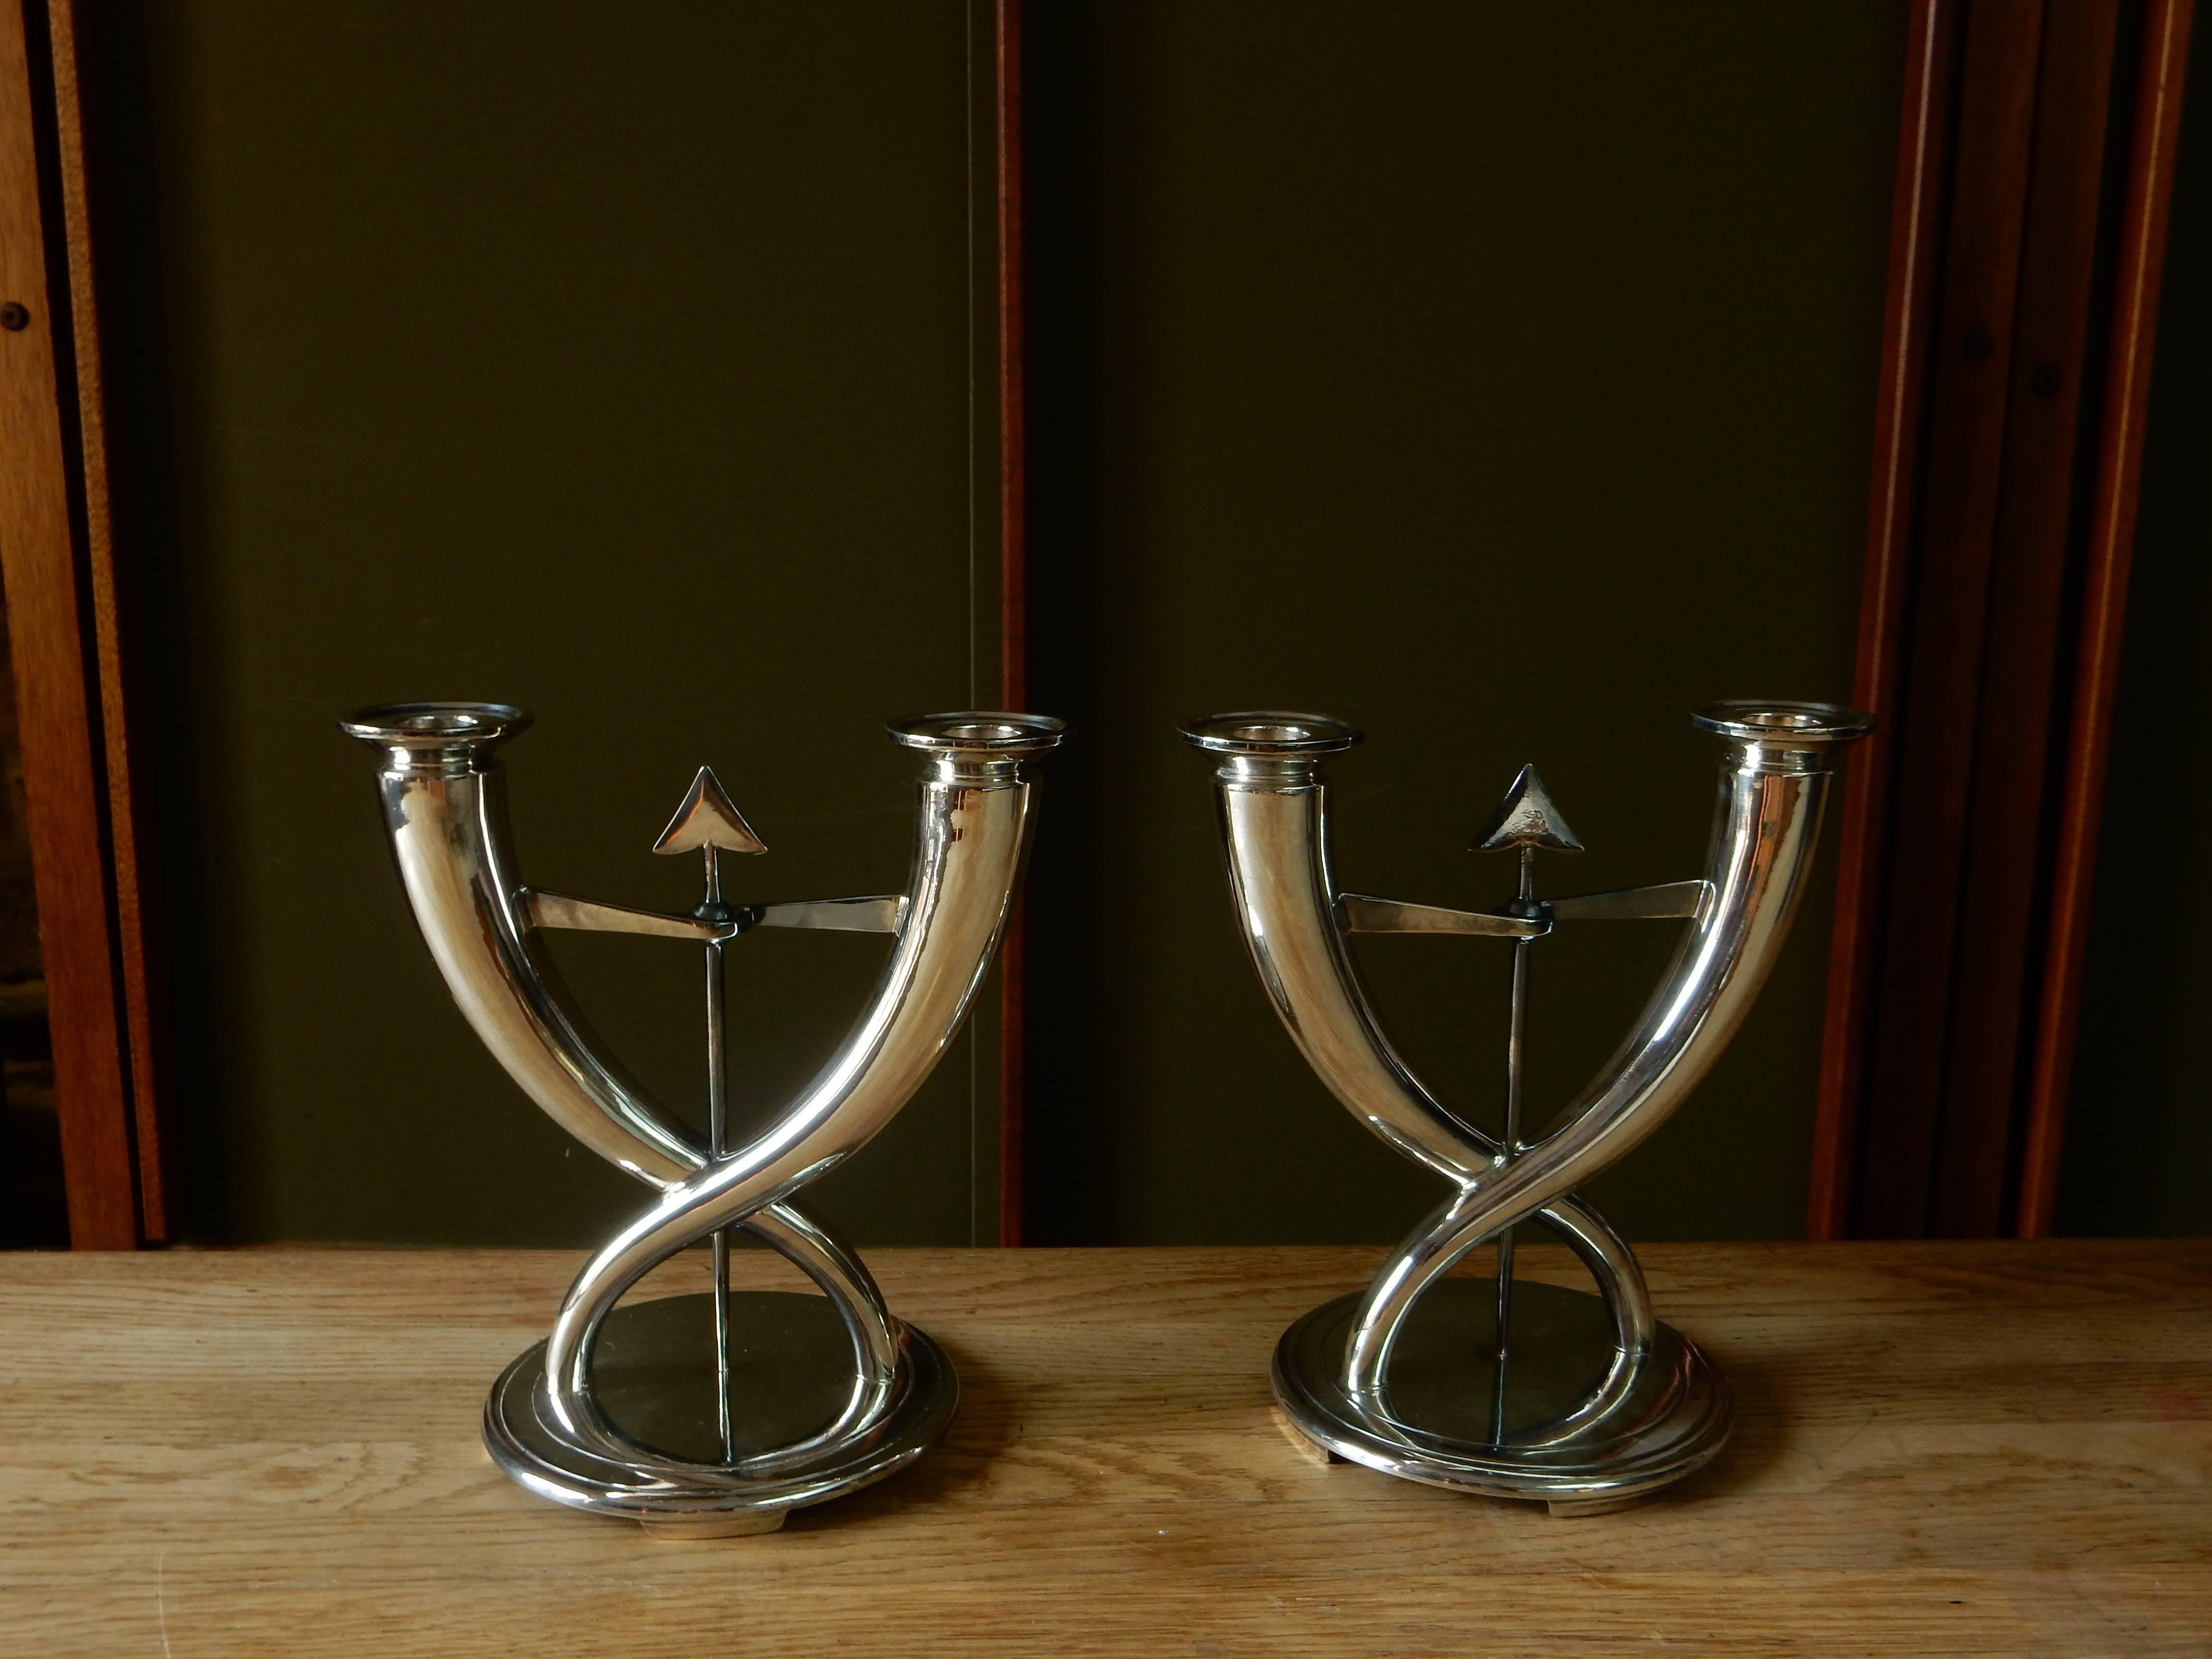 A very famous pair of candelabra designed in 1928 by Gio Ponti for Christofle.made of nickel stell(signed Gallia and numero:6055)
very good original condition.